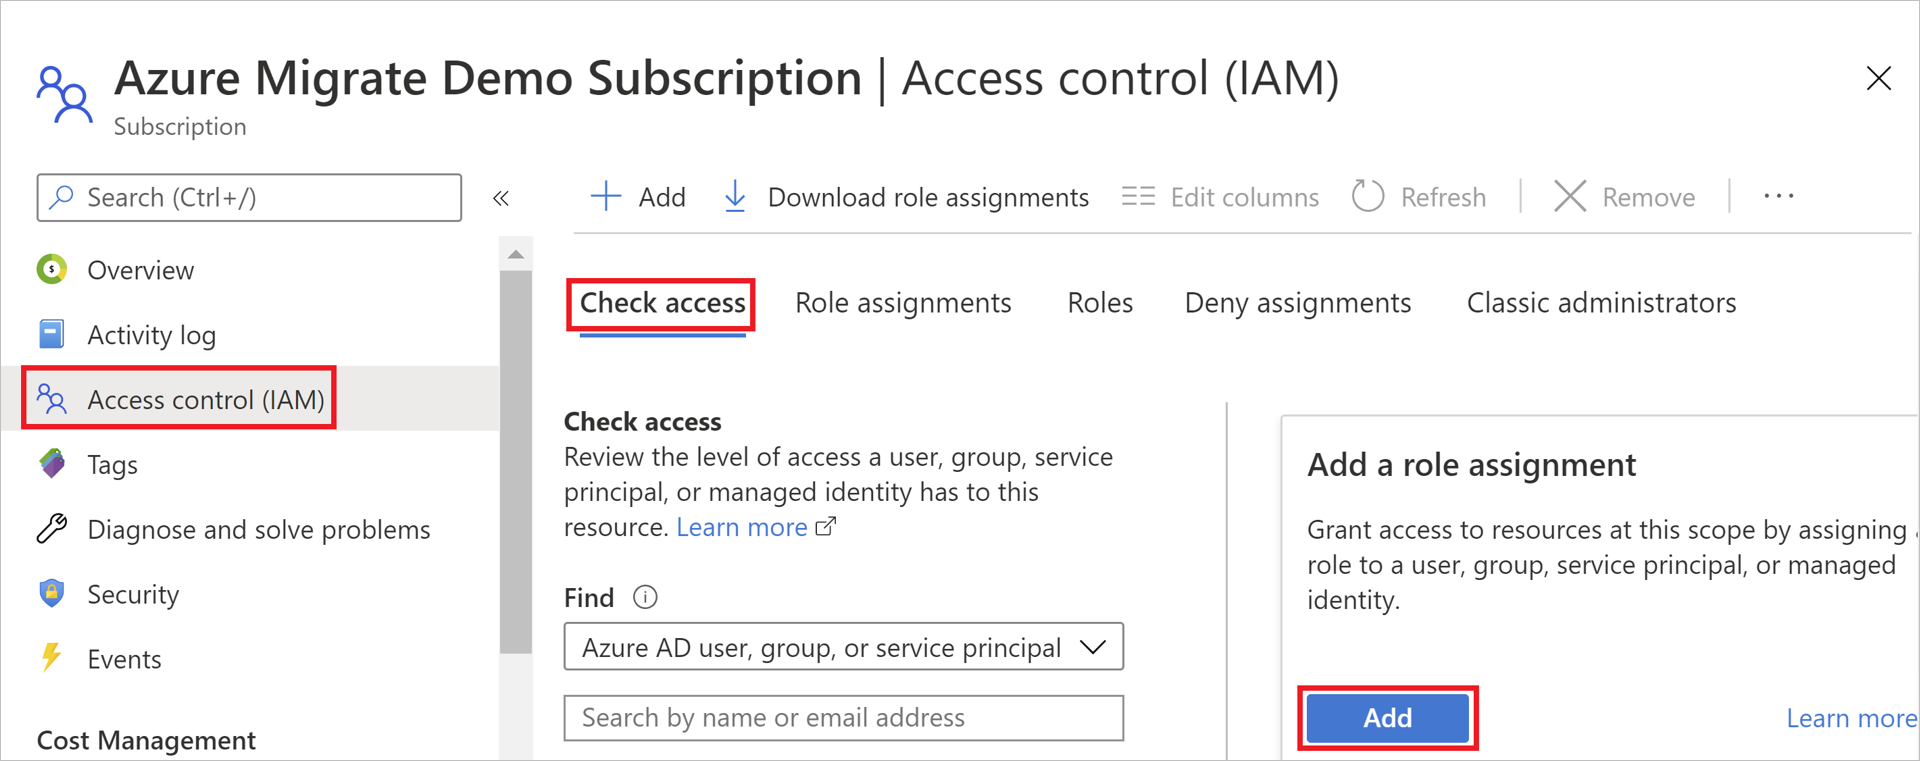 Search for a user account to check access and assign a role